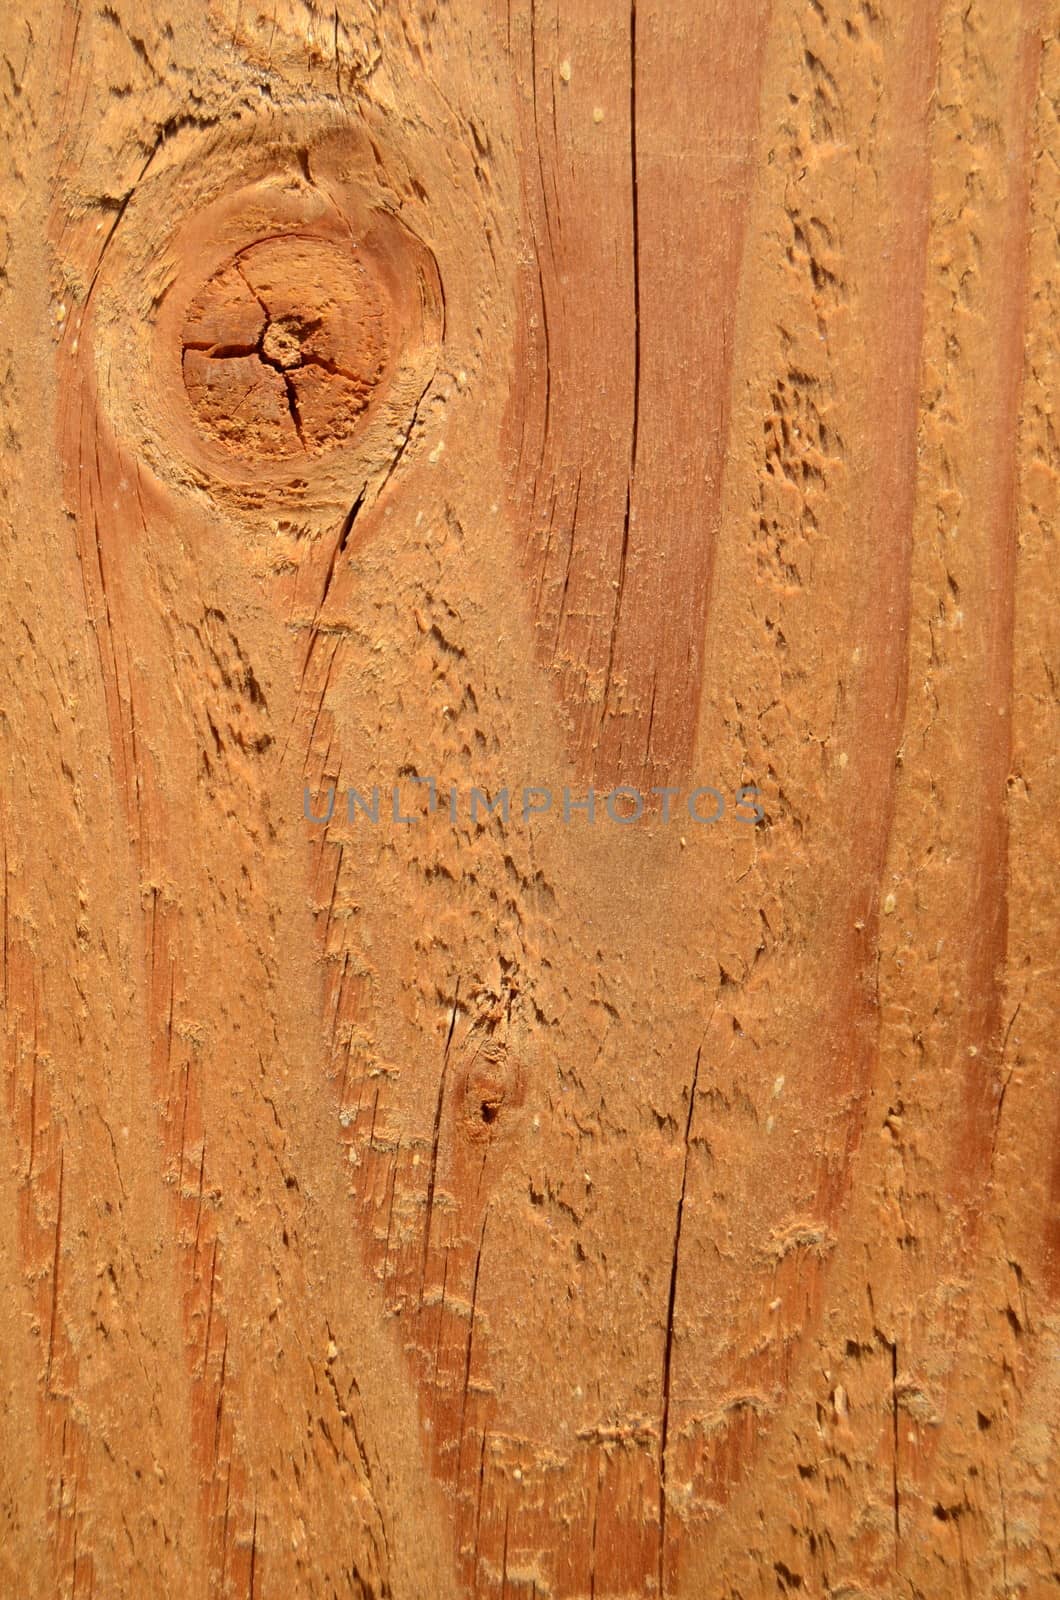 Background Texture Of A Freshly Cut Plank Of Wood